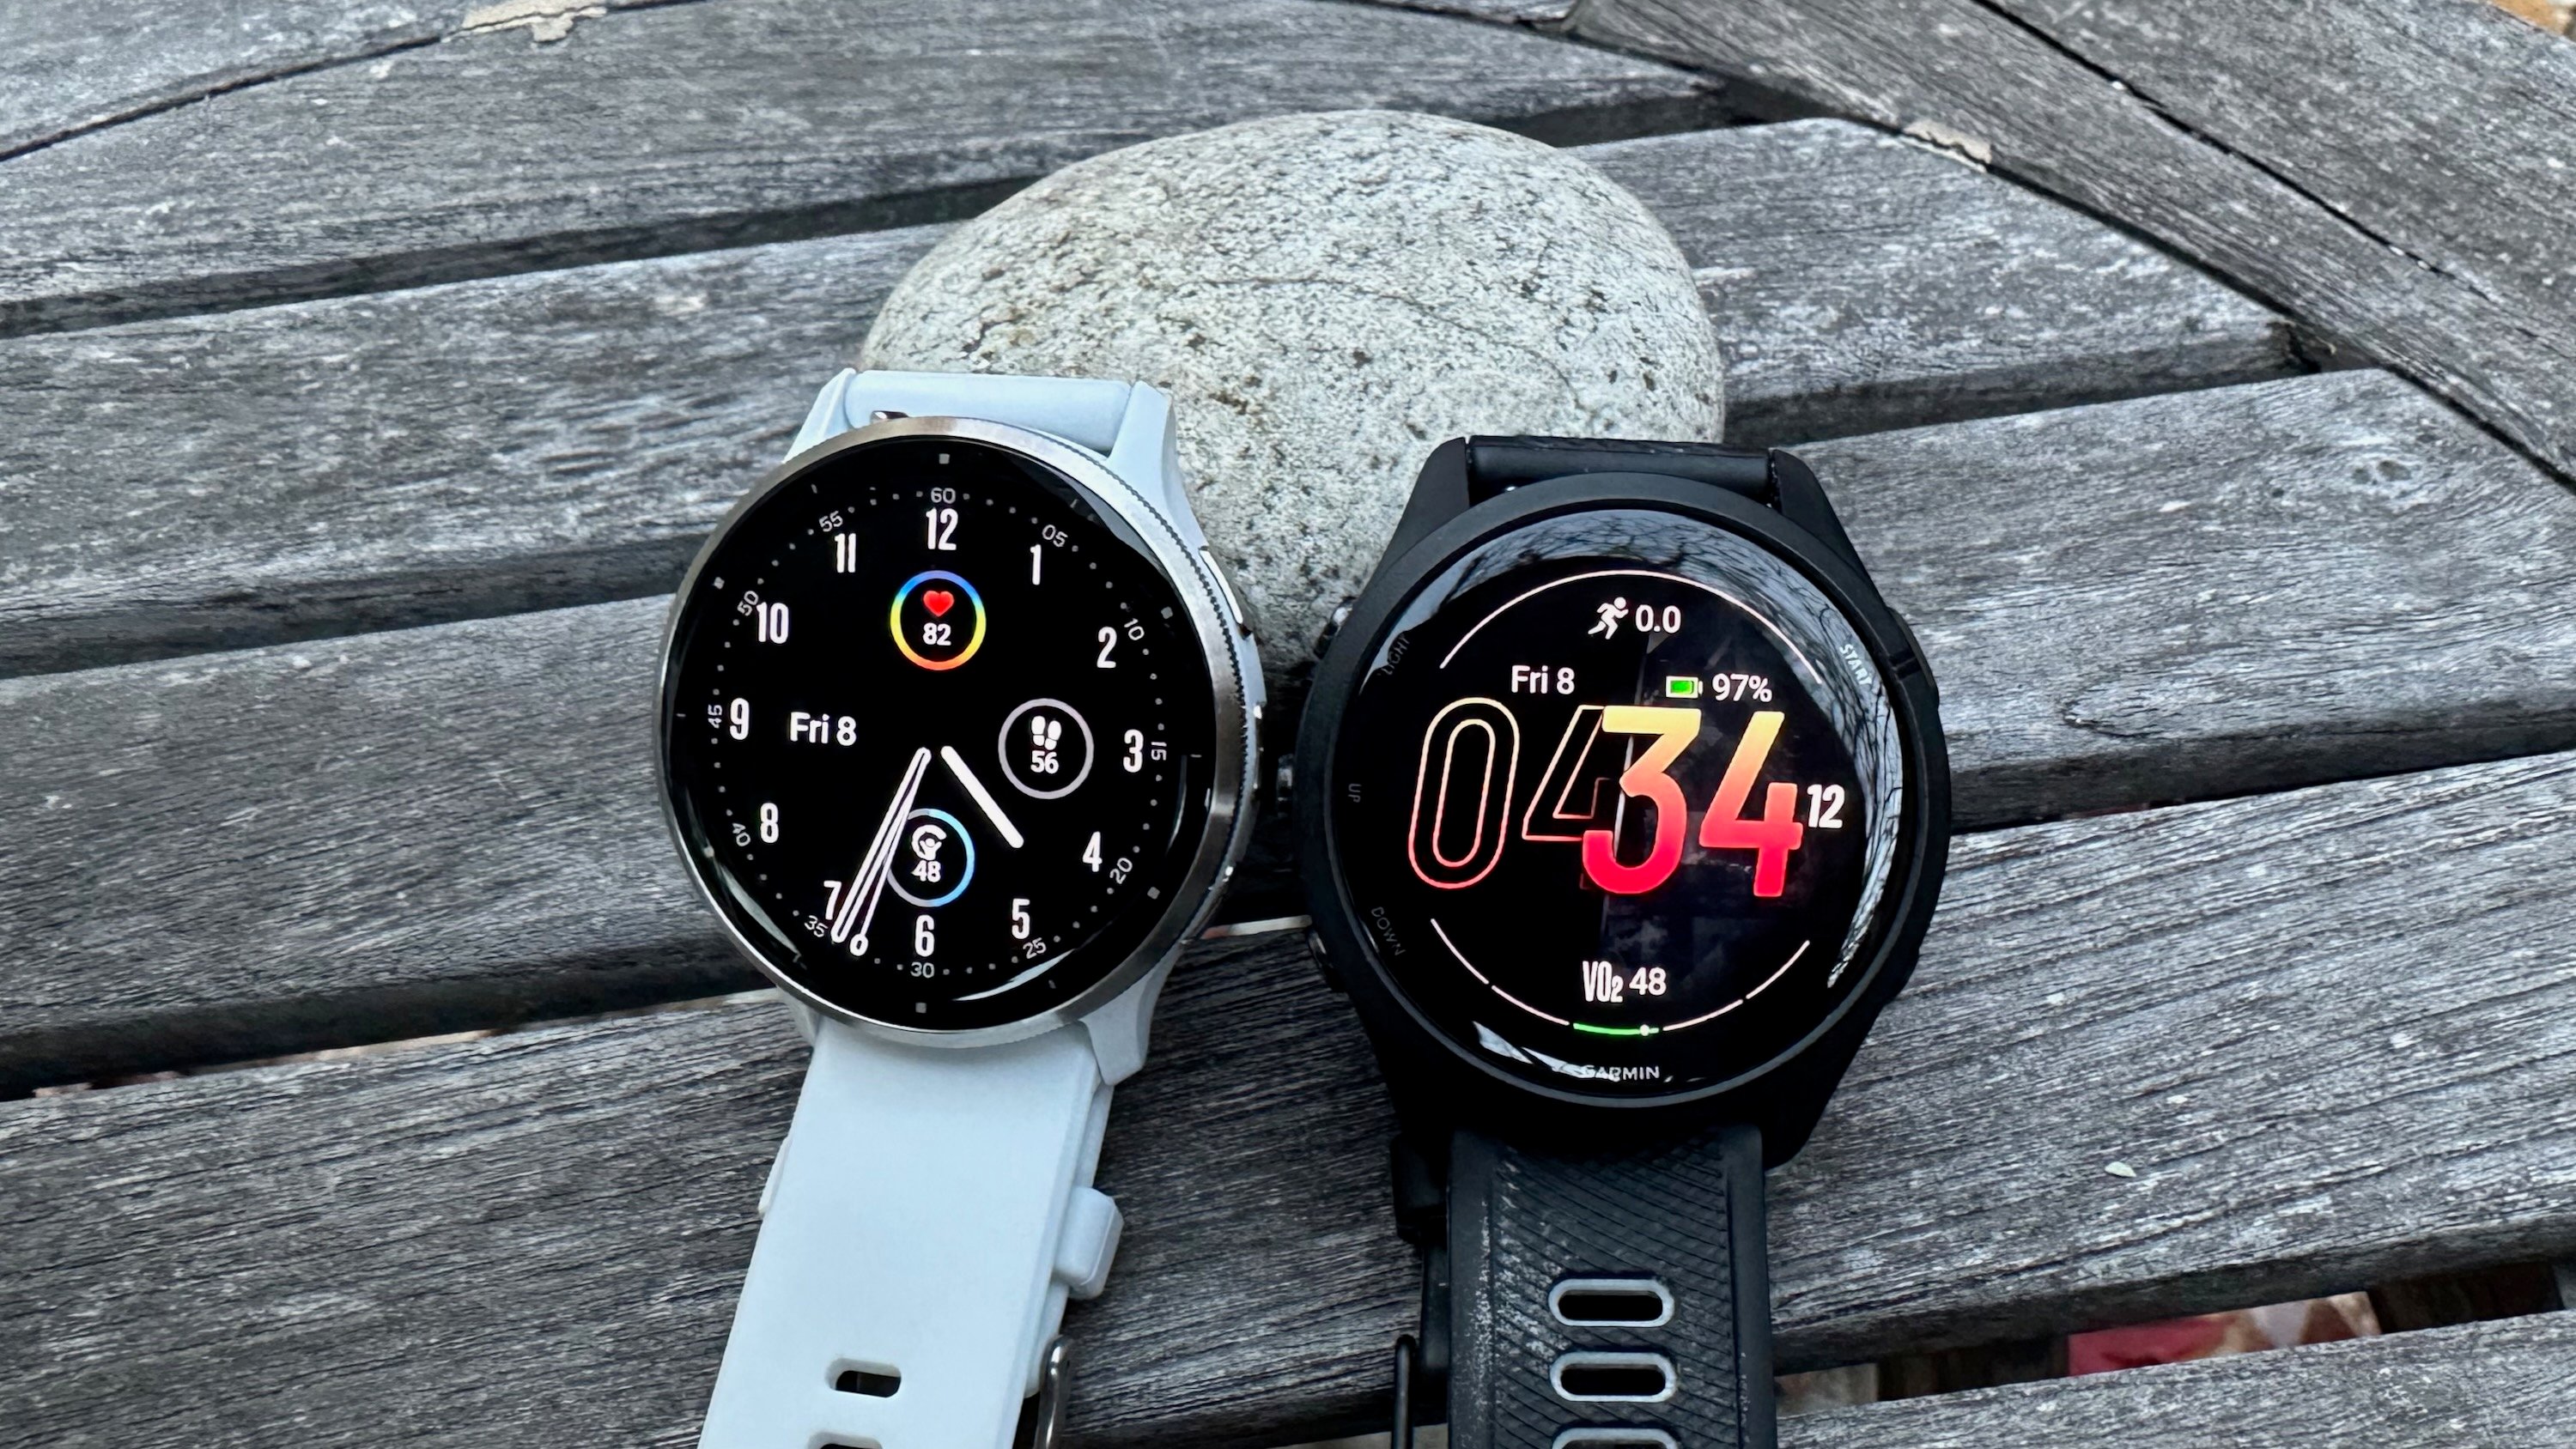 The Garmin Venu 3 (left) and Forerunner 265 (right) side-by-side